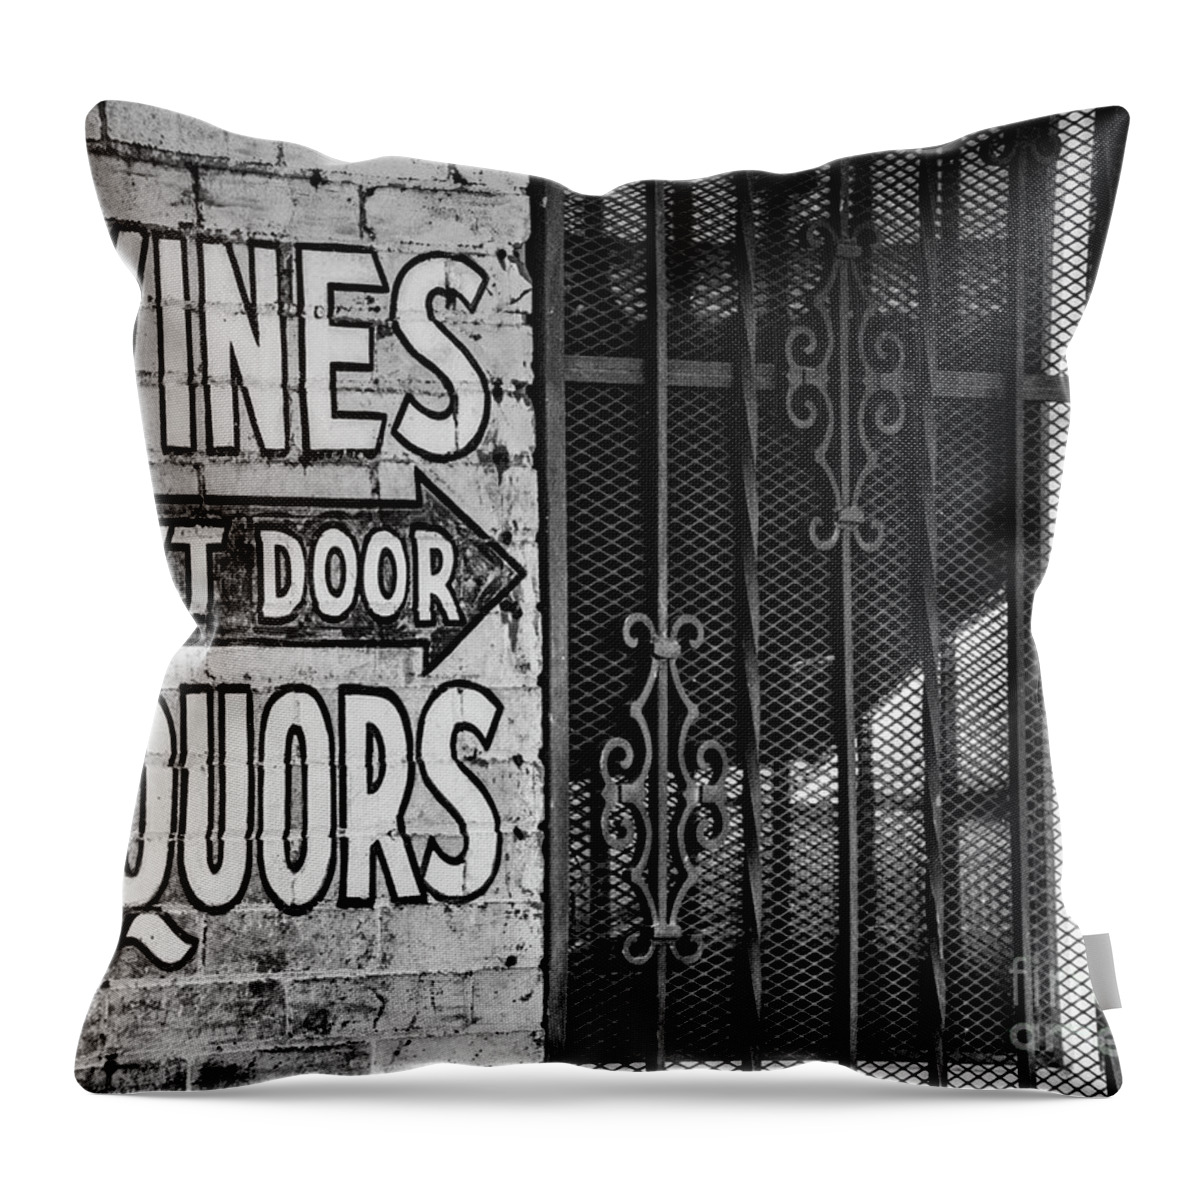 Signs Throw Pillow featuring the photograph Wines Liquors Next Door by John Greco